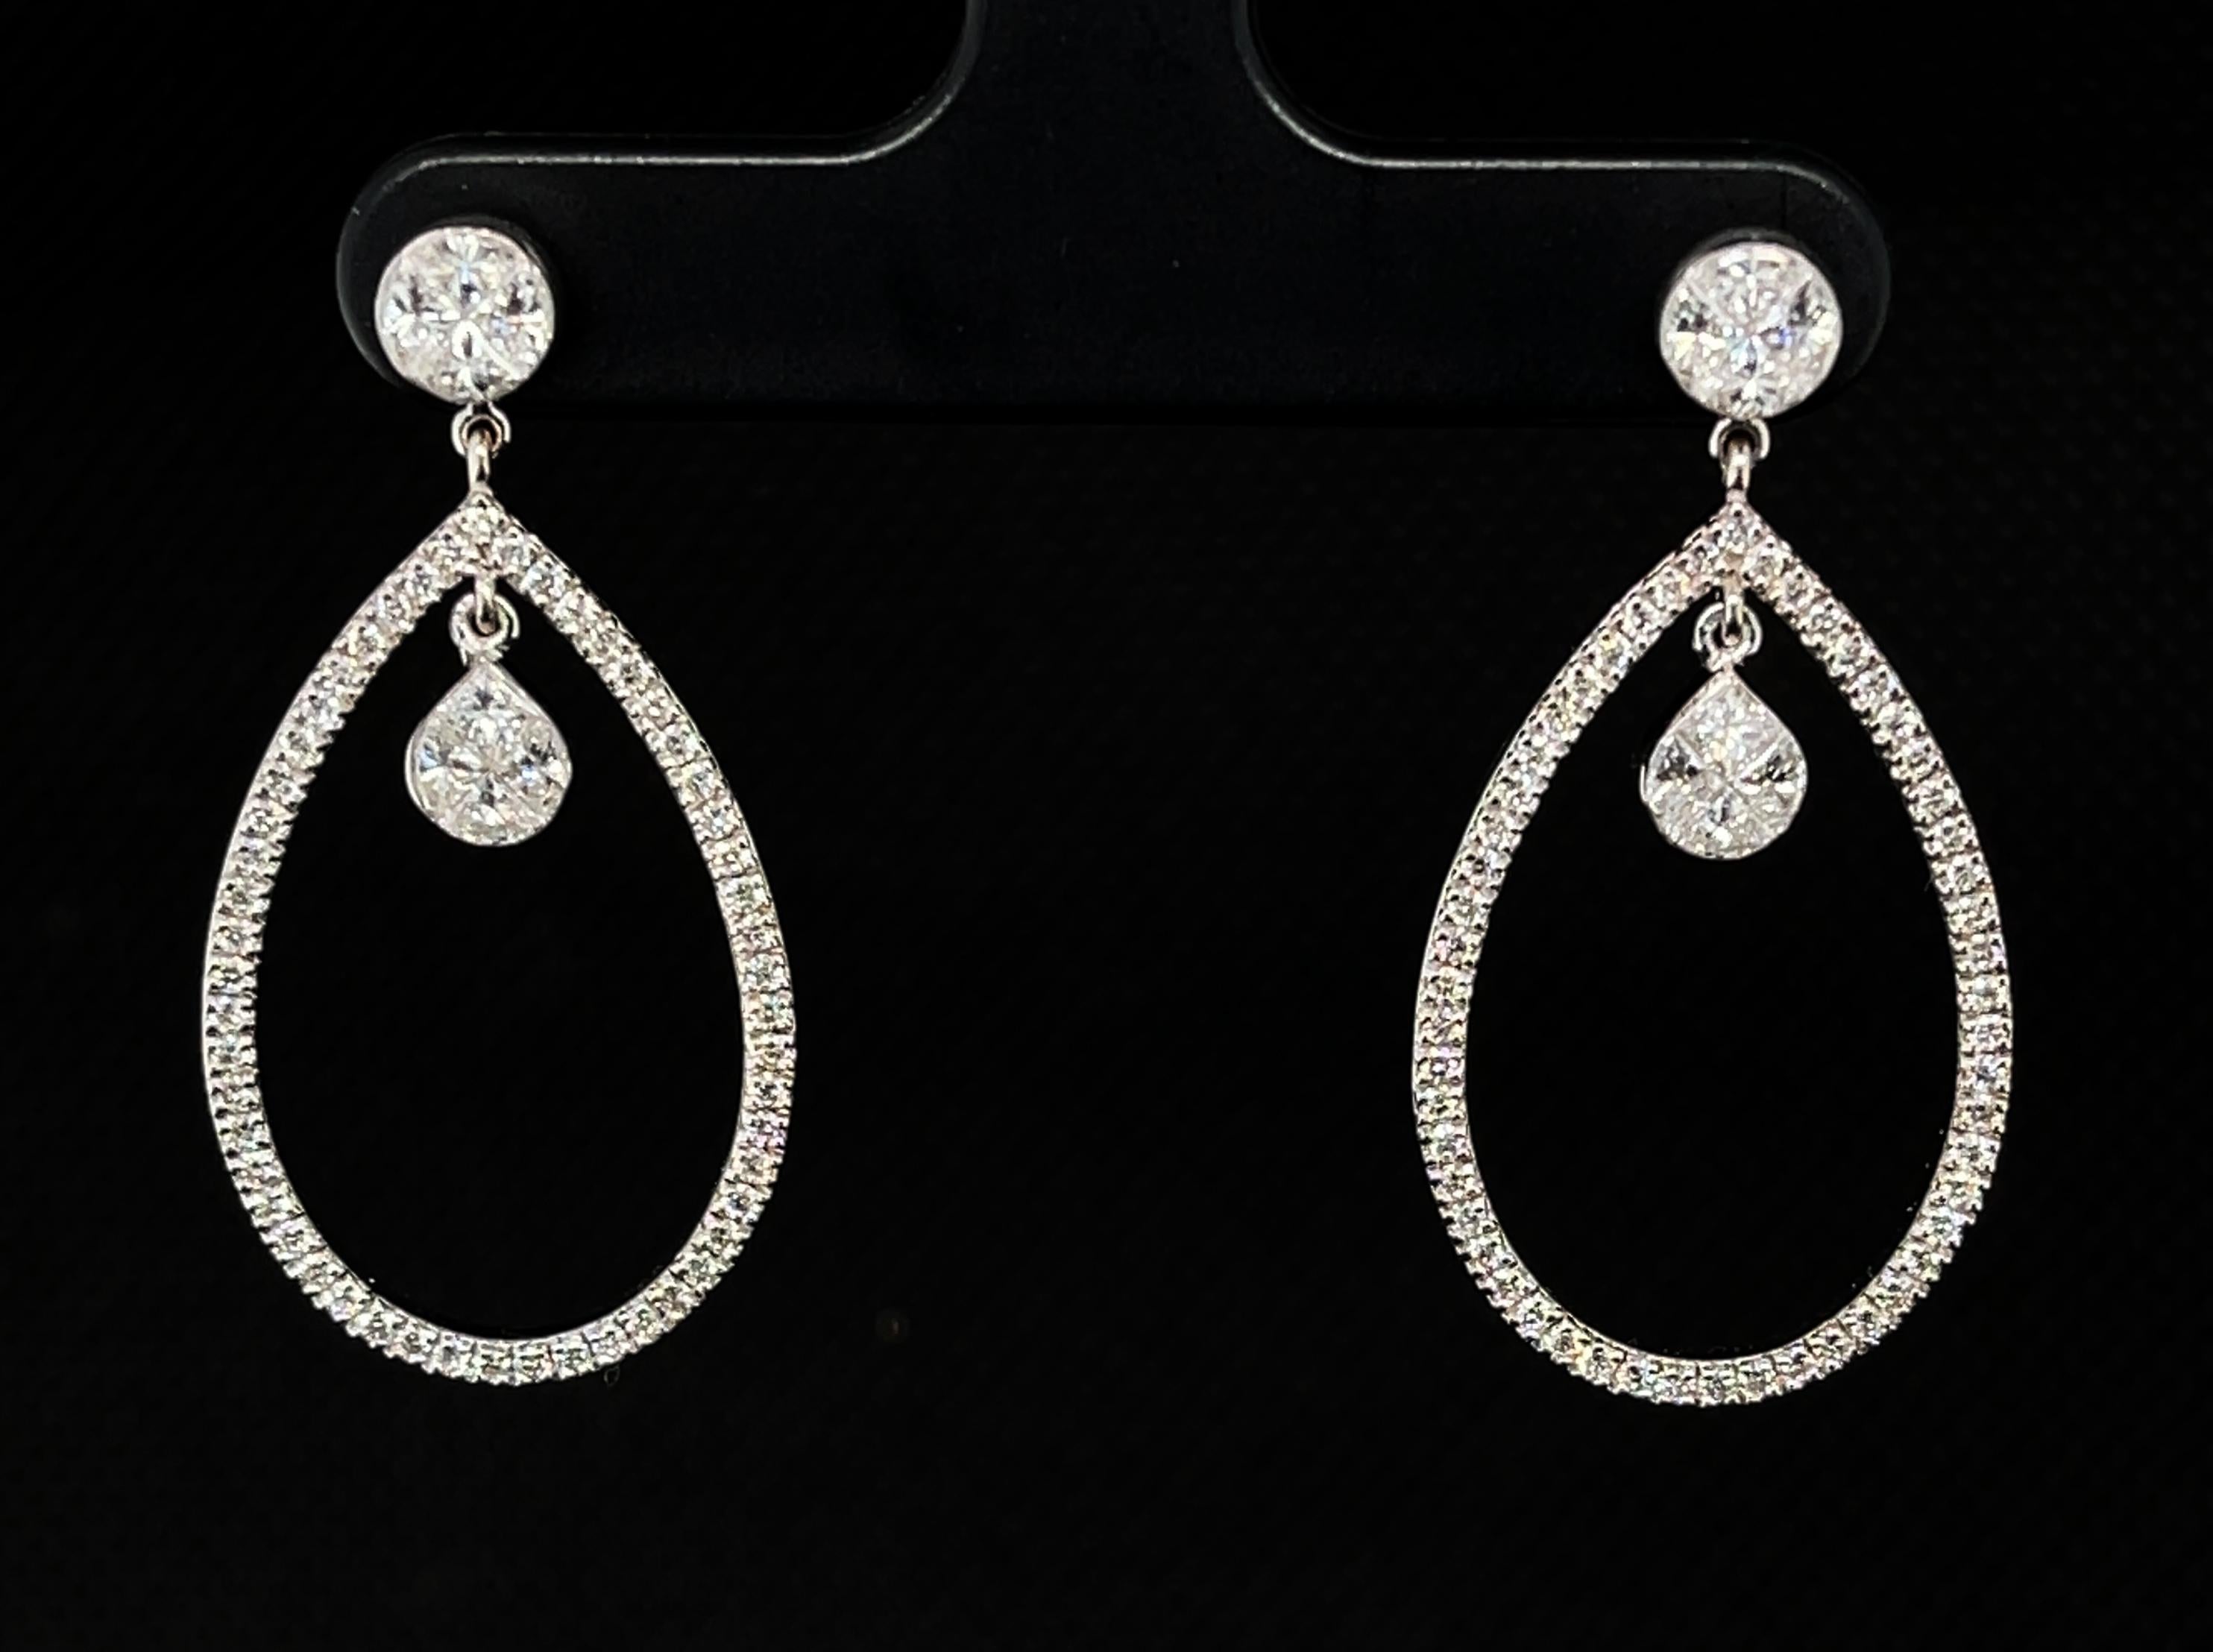 These earrings are classic with a twist! They feature triangular cut diamonds, princesses cut diamonds and round brilliant cut diamonds that weigh a total of 1.55 carats. These diamonds catch the light in different ways because of their varied cuts,